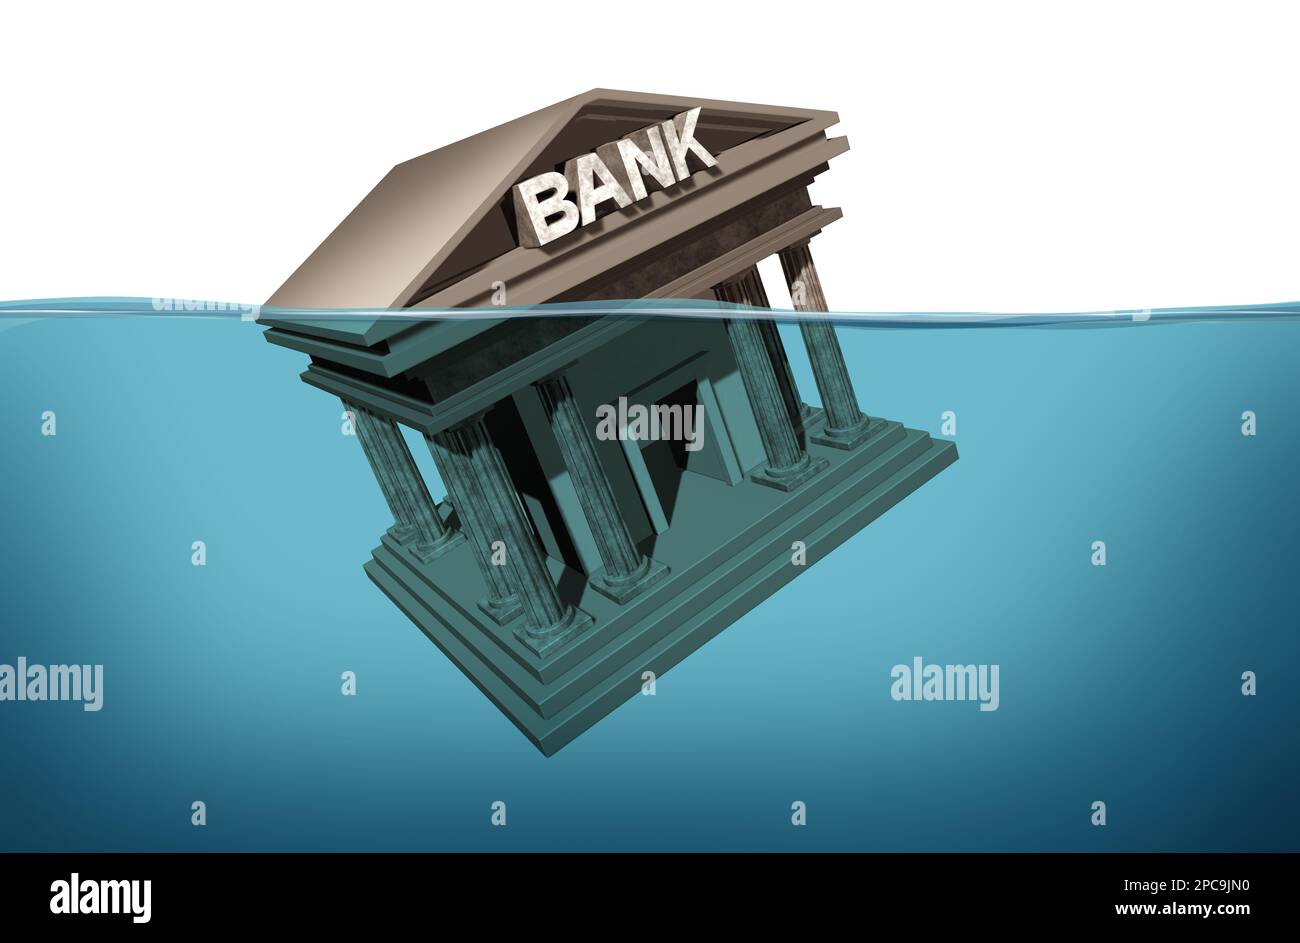 Bank Crisis and Banking system drowning in debt as a financial instability or insolvency concept as an  urgent business and global market problem as a Stock Photo